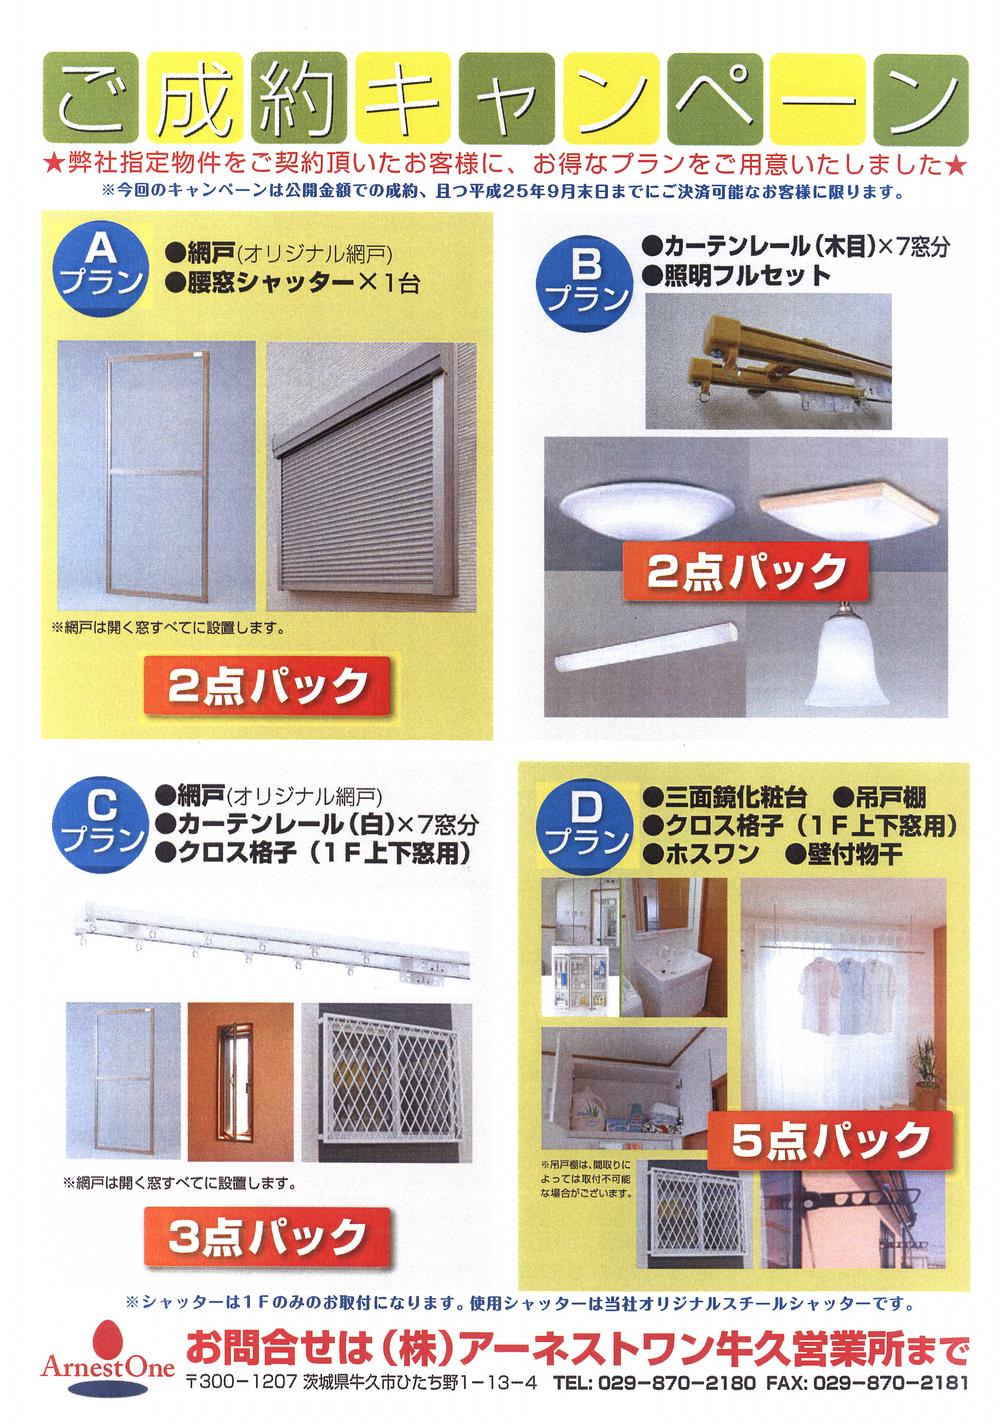 Other. New life support! Screen door ・ Curtain rail ・ Lighting full set ・ shutter ・ Three-sided mirror vanity ・ Hanging cupboard ・ Interference with in-room wall material ・ From the surface grating 2 ~ 5-point pack gift! (Until the end of January terms and conditions)